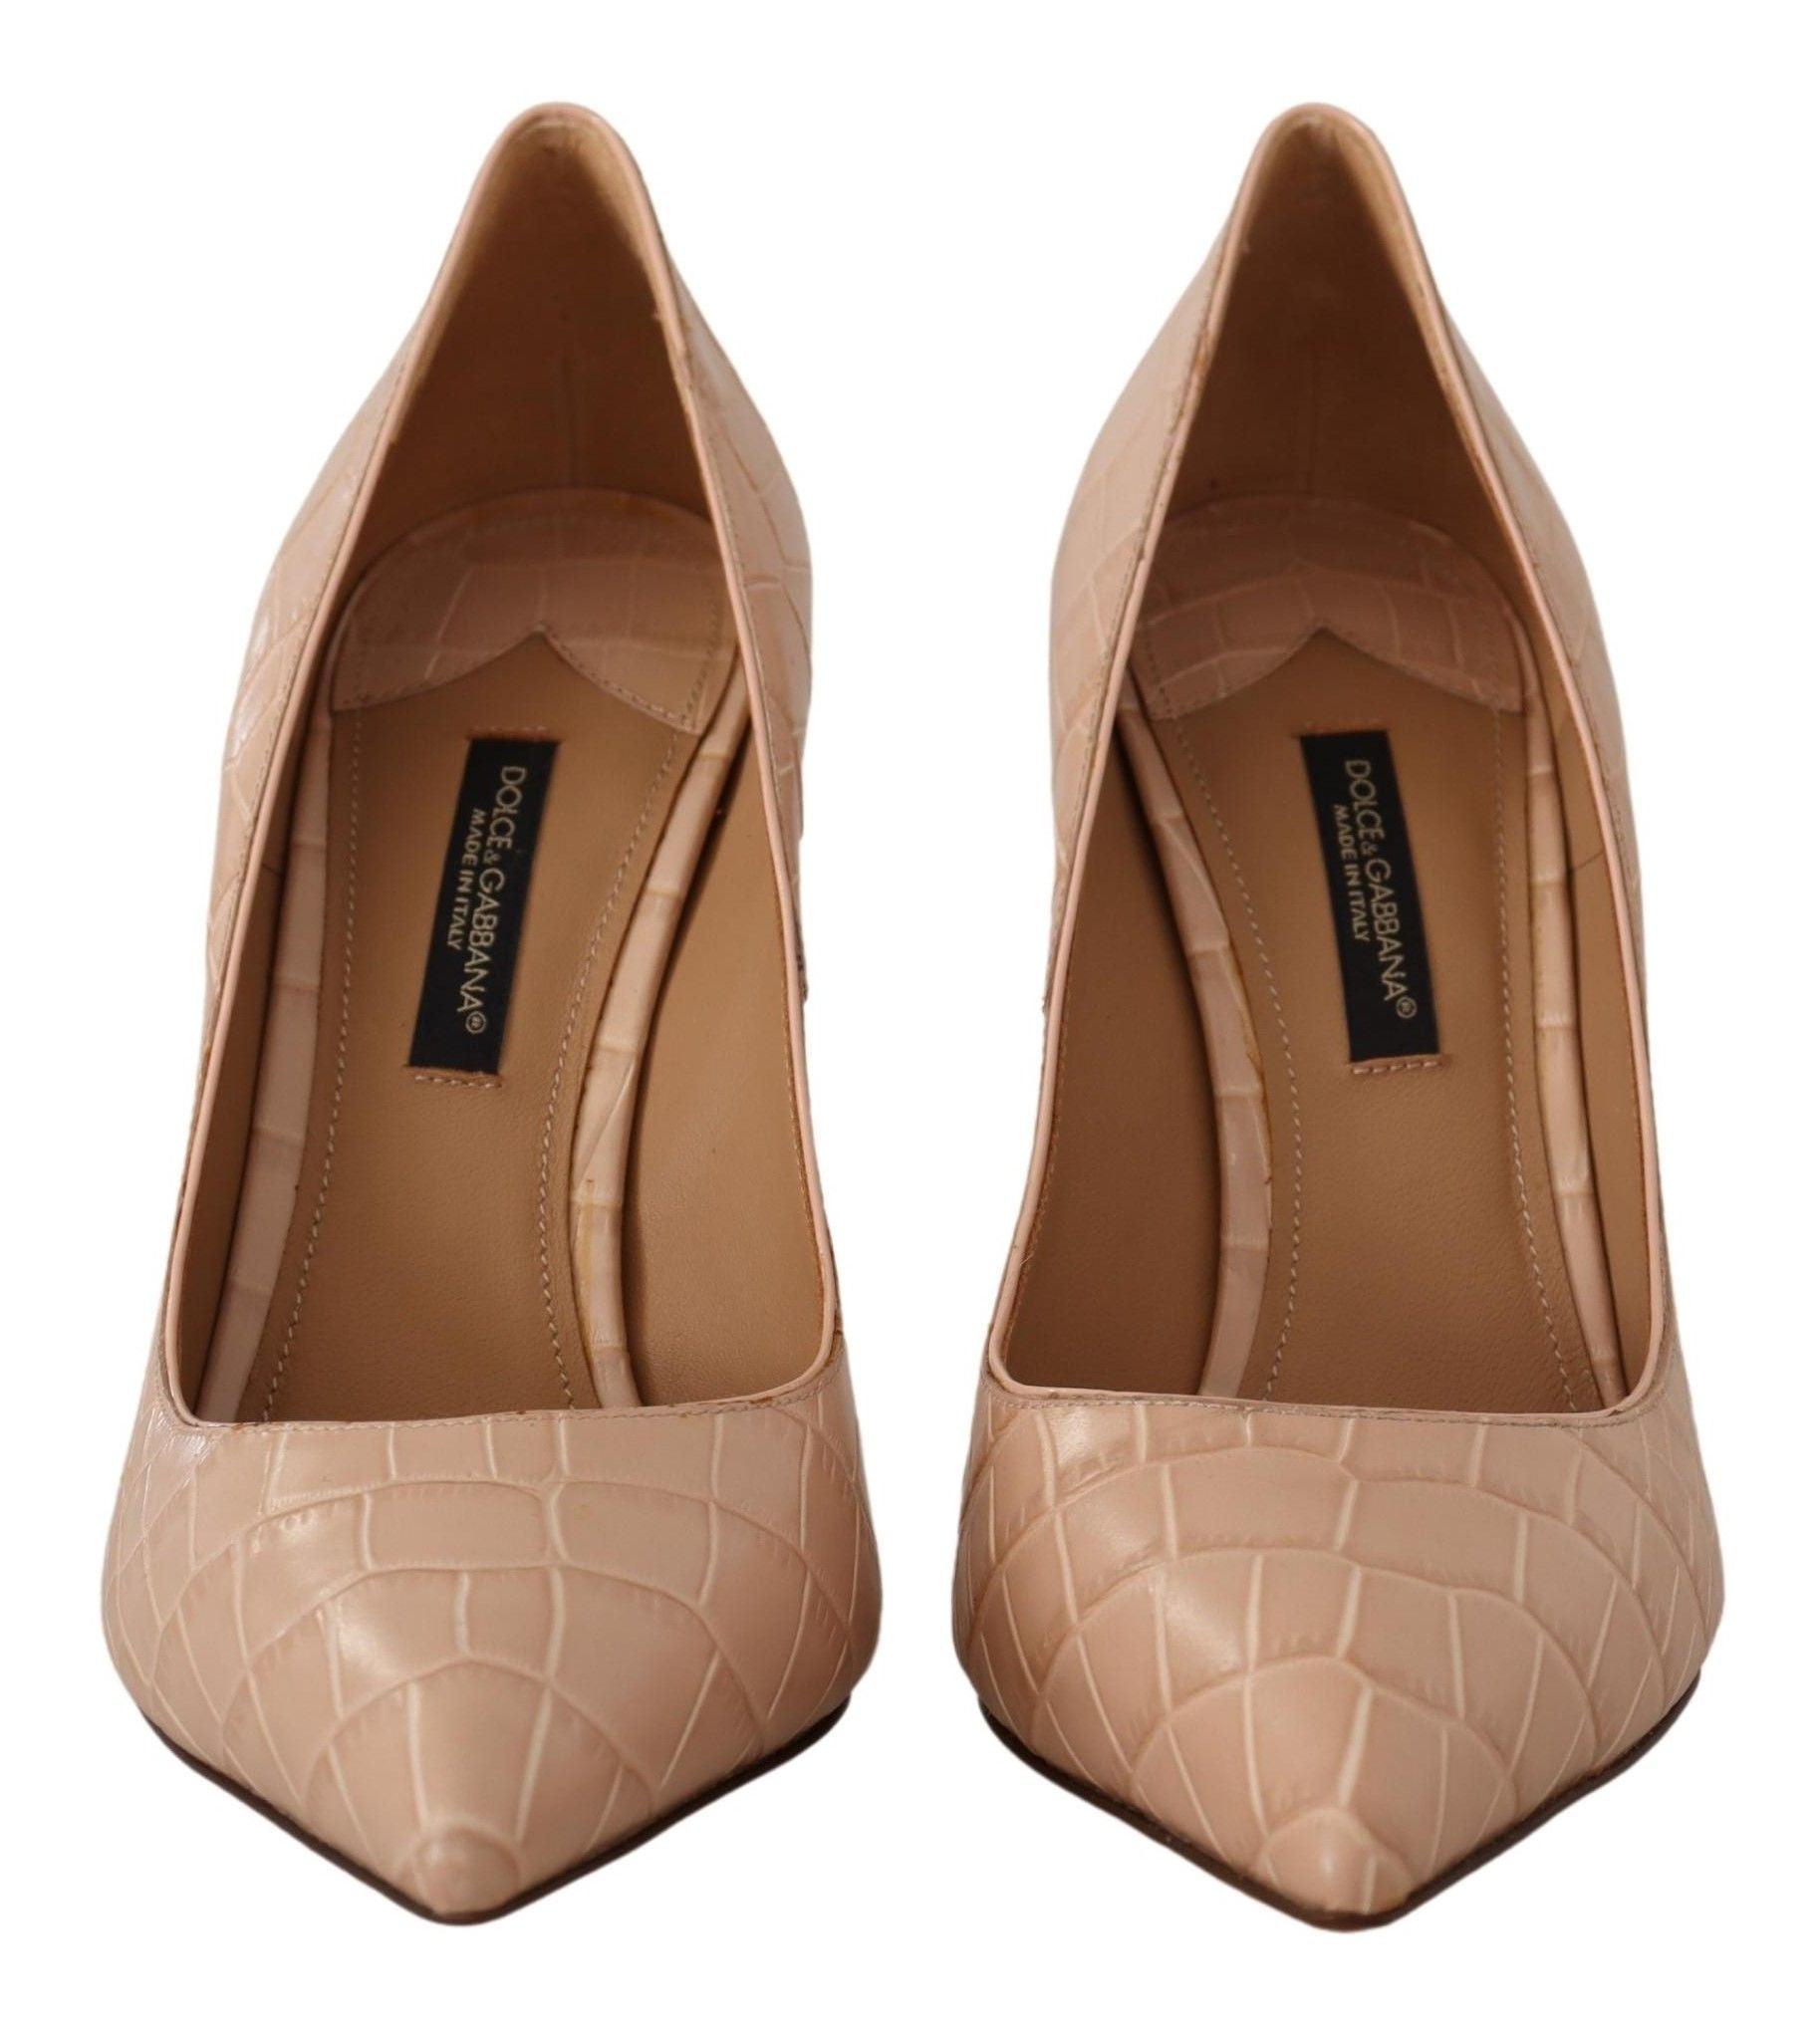 Dolce & Gabbana Beige Leather Bellucci Heels Pumps Shoes - Designed by Dolce & Gabbana Available to Buy at a Discounted Price on Moon Behind The Hill Online Designer Discount Store